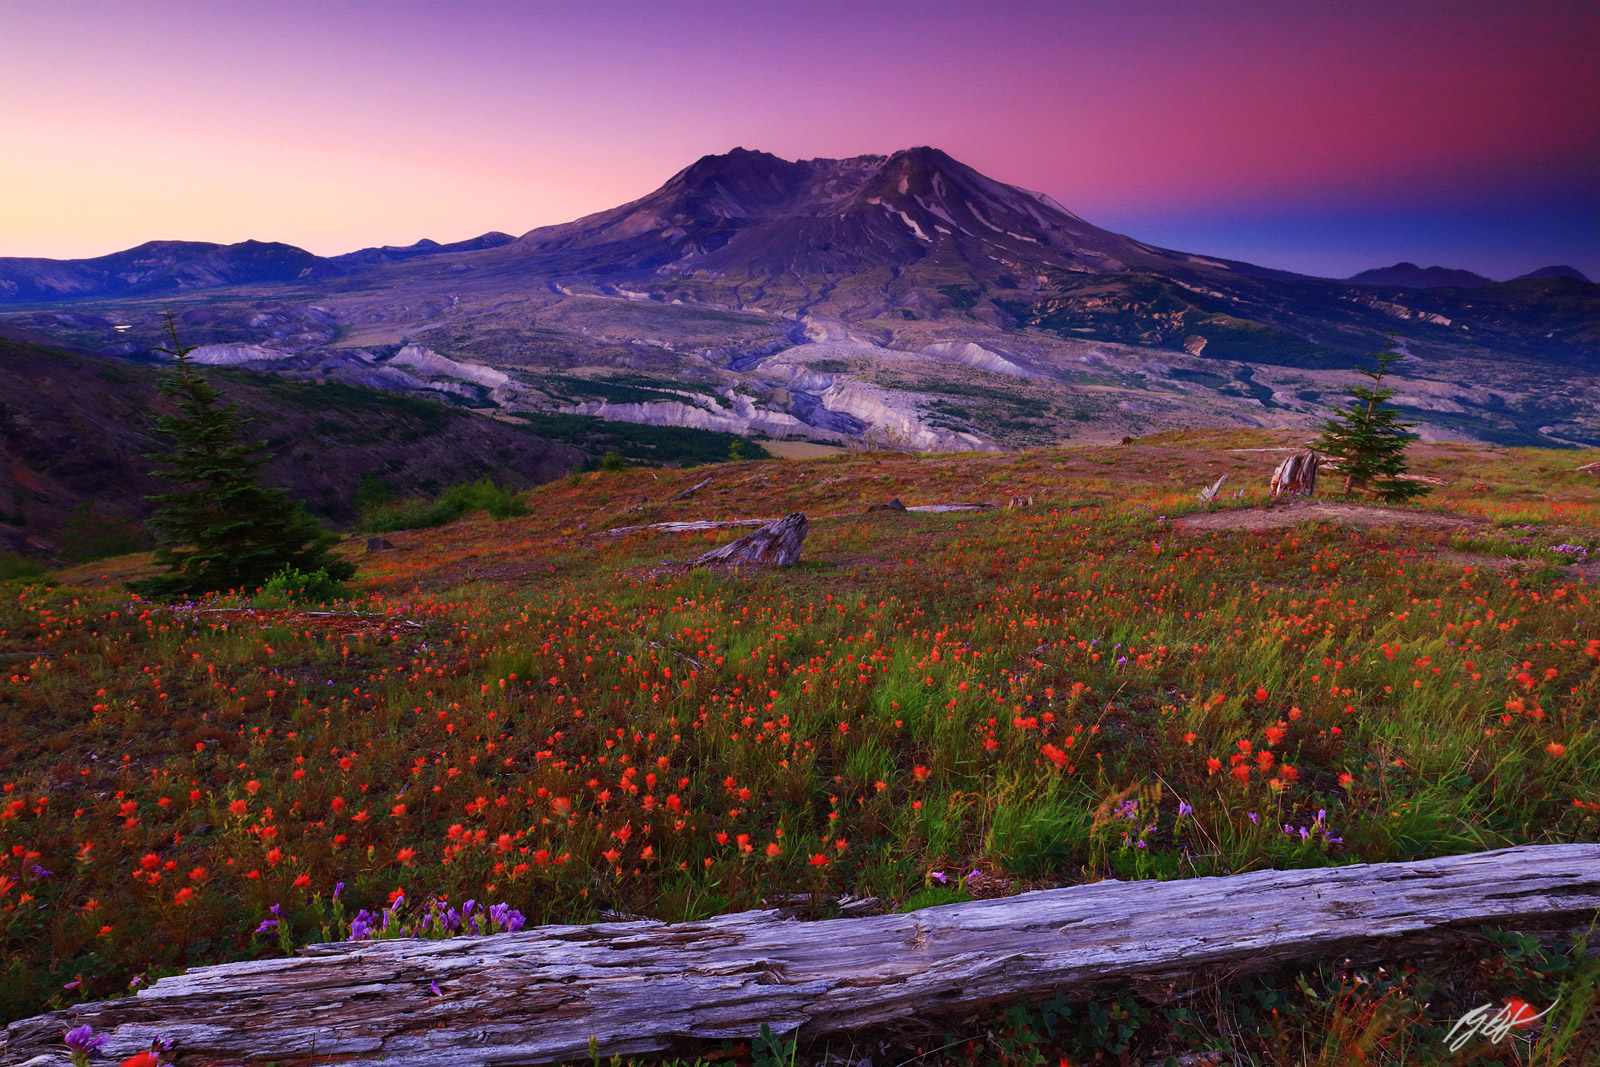 Sunset Wildflowers and Mt St Helens from Johnston Ridge in Mt St Helens National Volcanic Monument in Washington